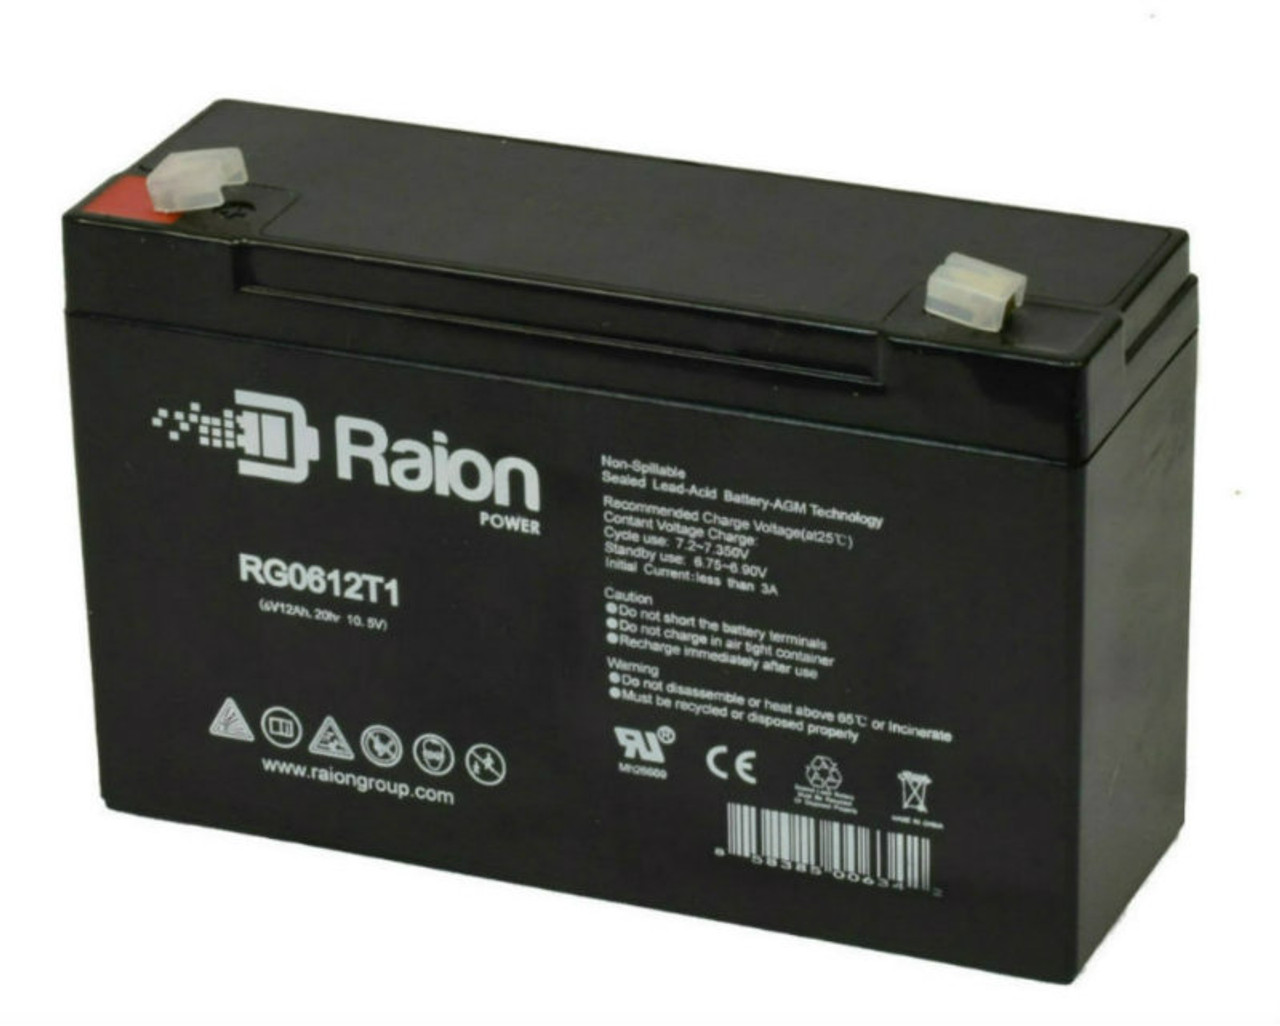 Raion Power RG06120T1 Replacement Emergency Light Battery for Sure-Lites UNH1SGB